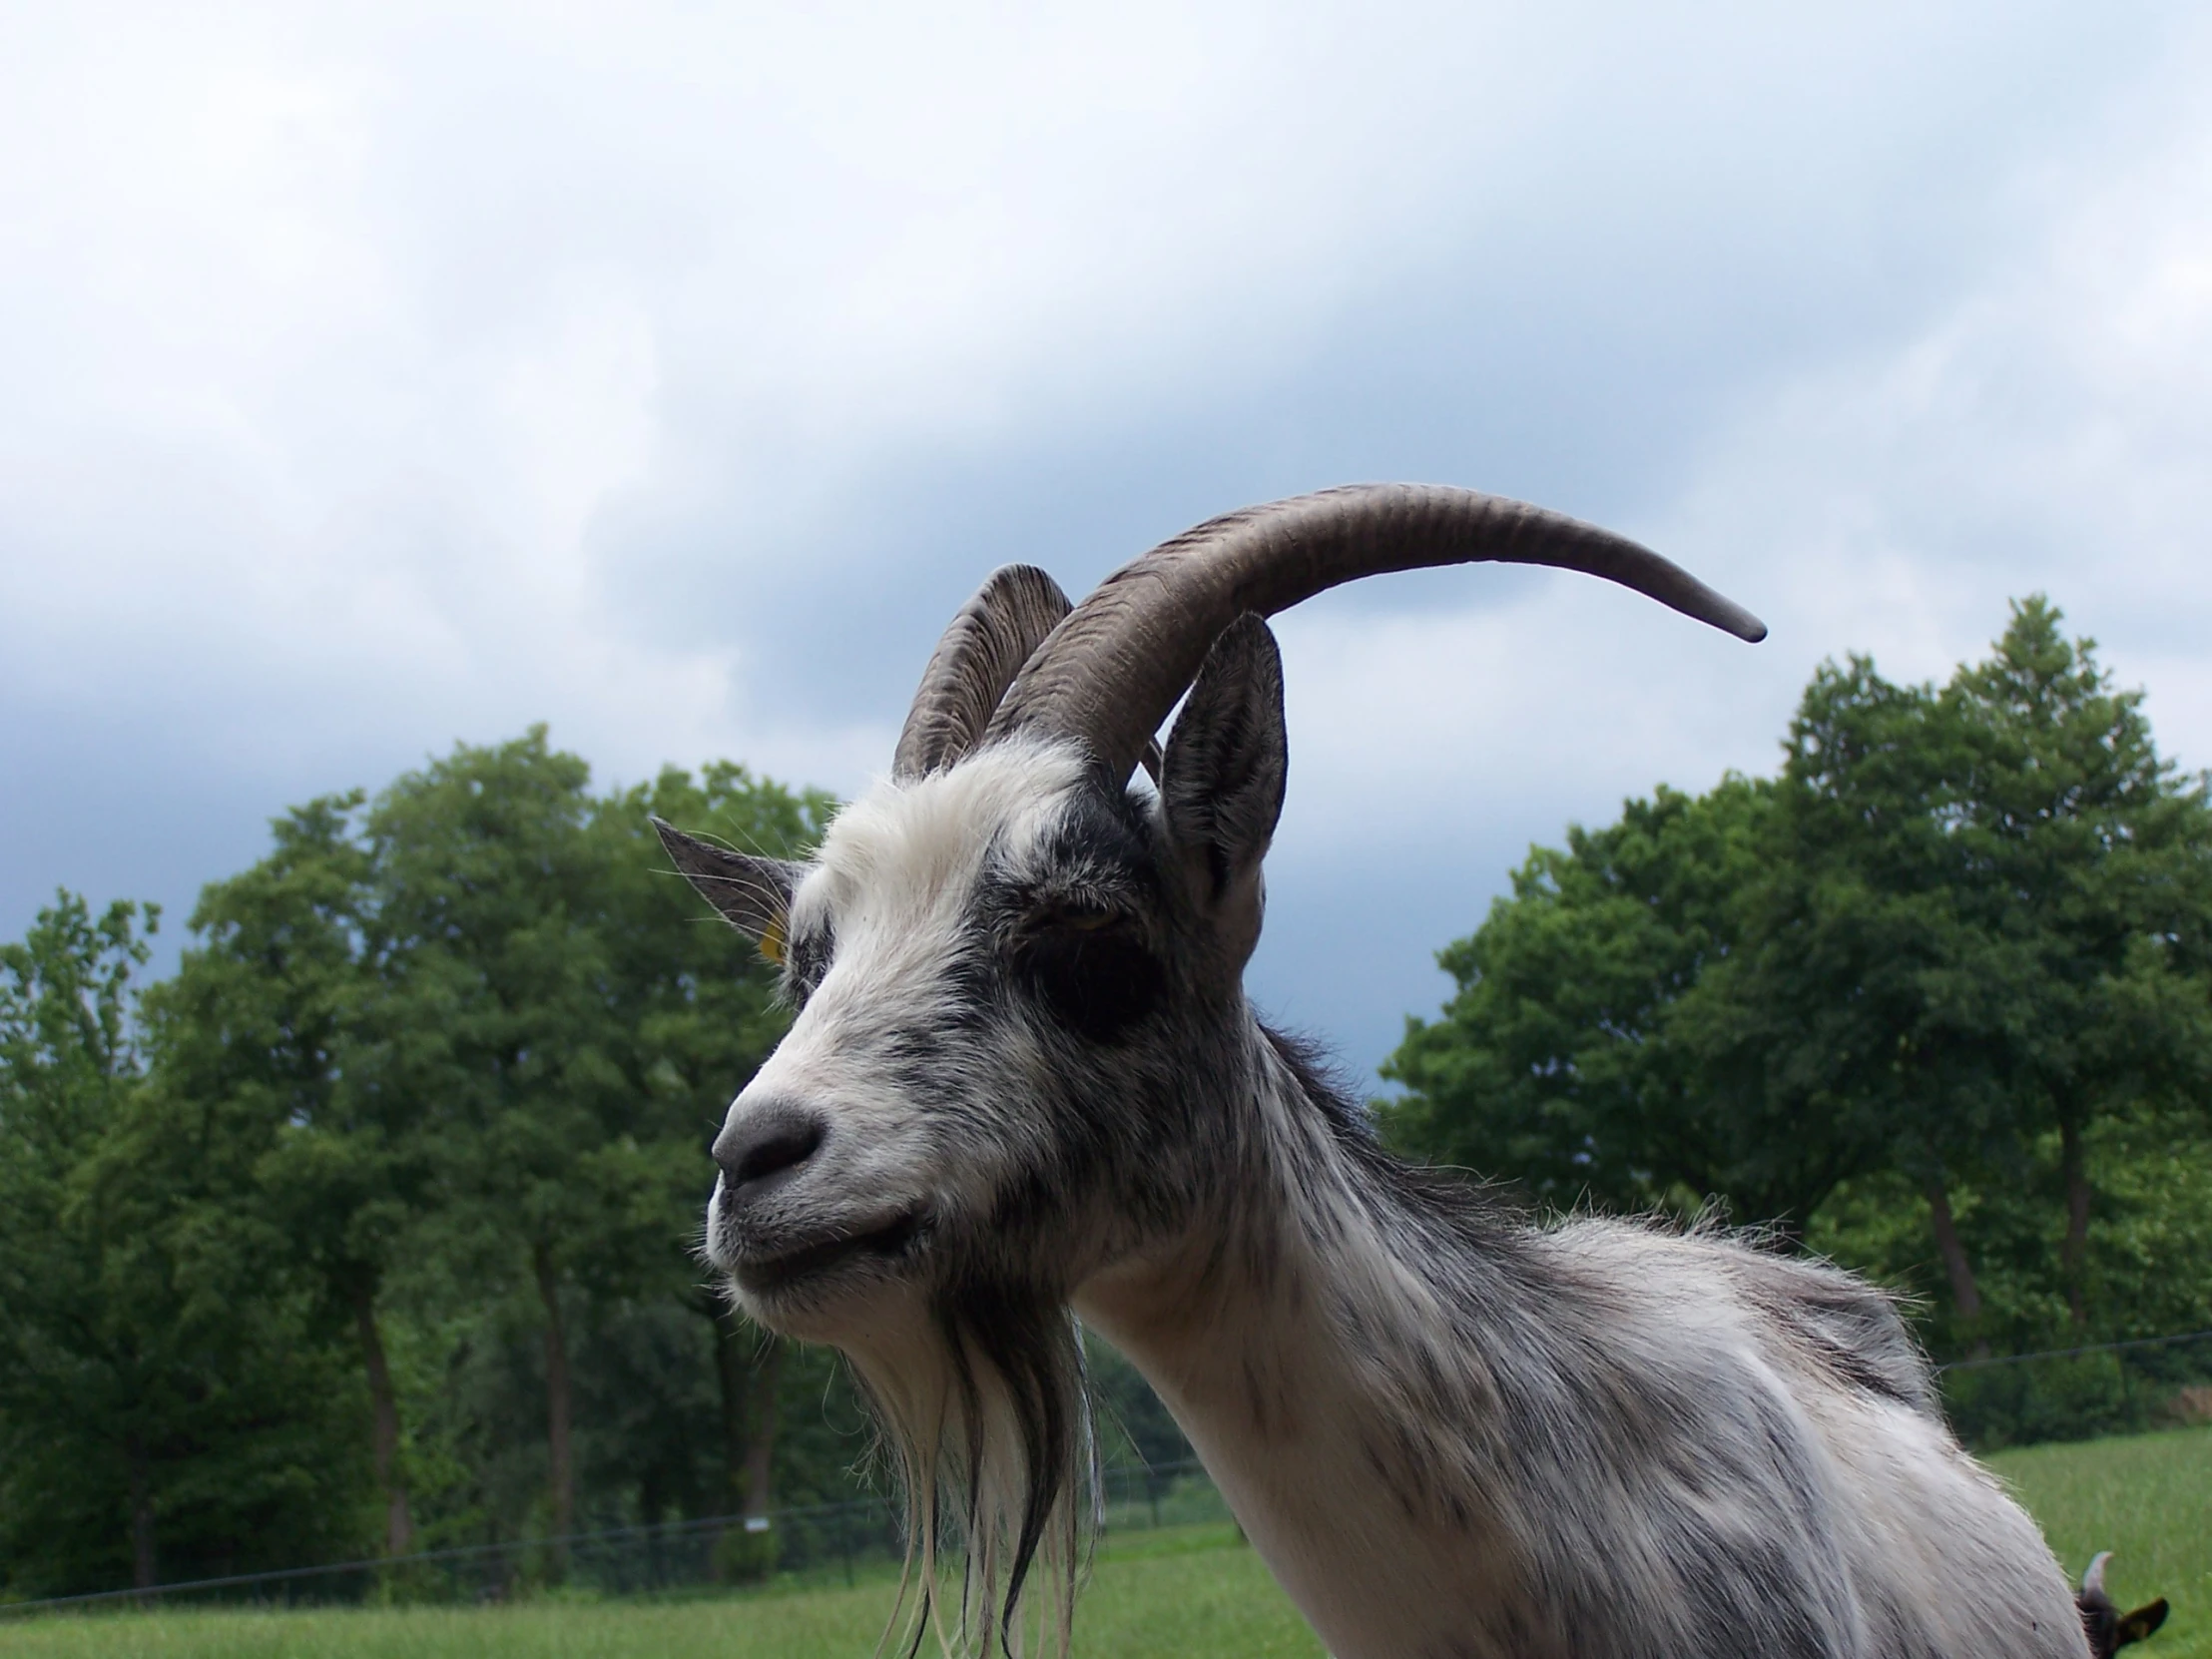 the long horn goat is standing on the grassy field